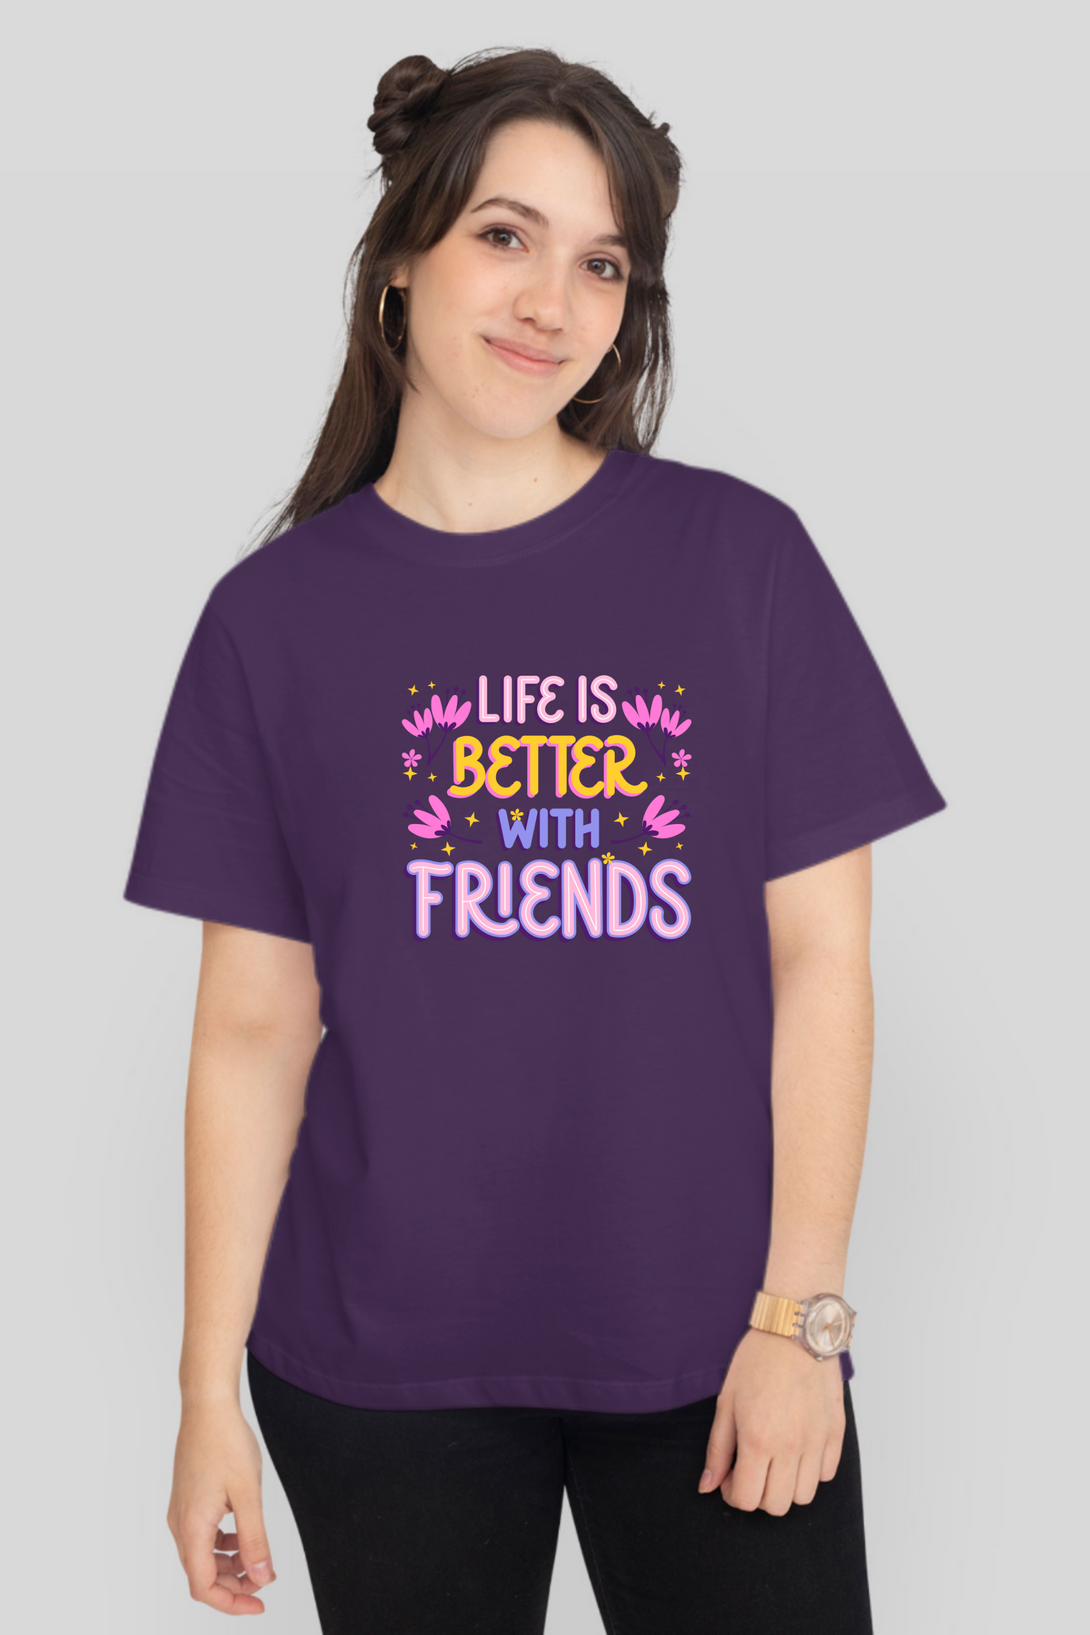 Life Is Better With Friends Printed T-Shirt For Women - WowWaves - 8